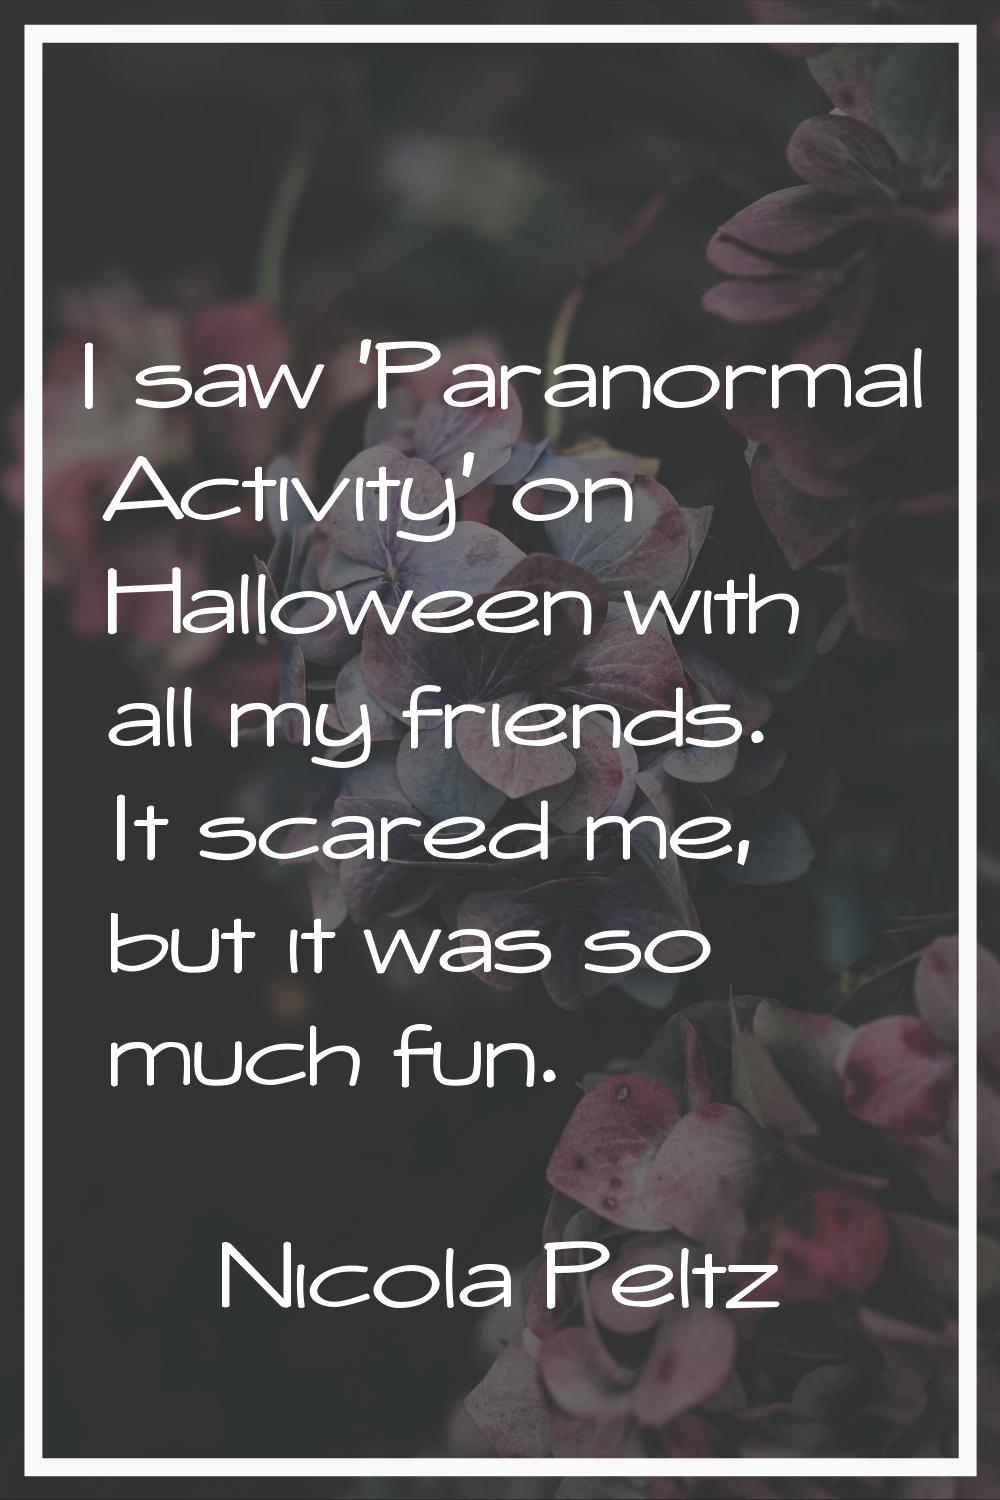 I saw 'Paranormal Activity' on Halloween with all my friends. It scared me, but it was so much fun.